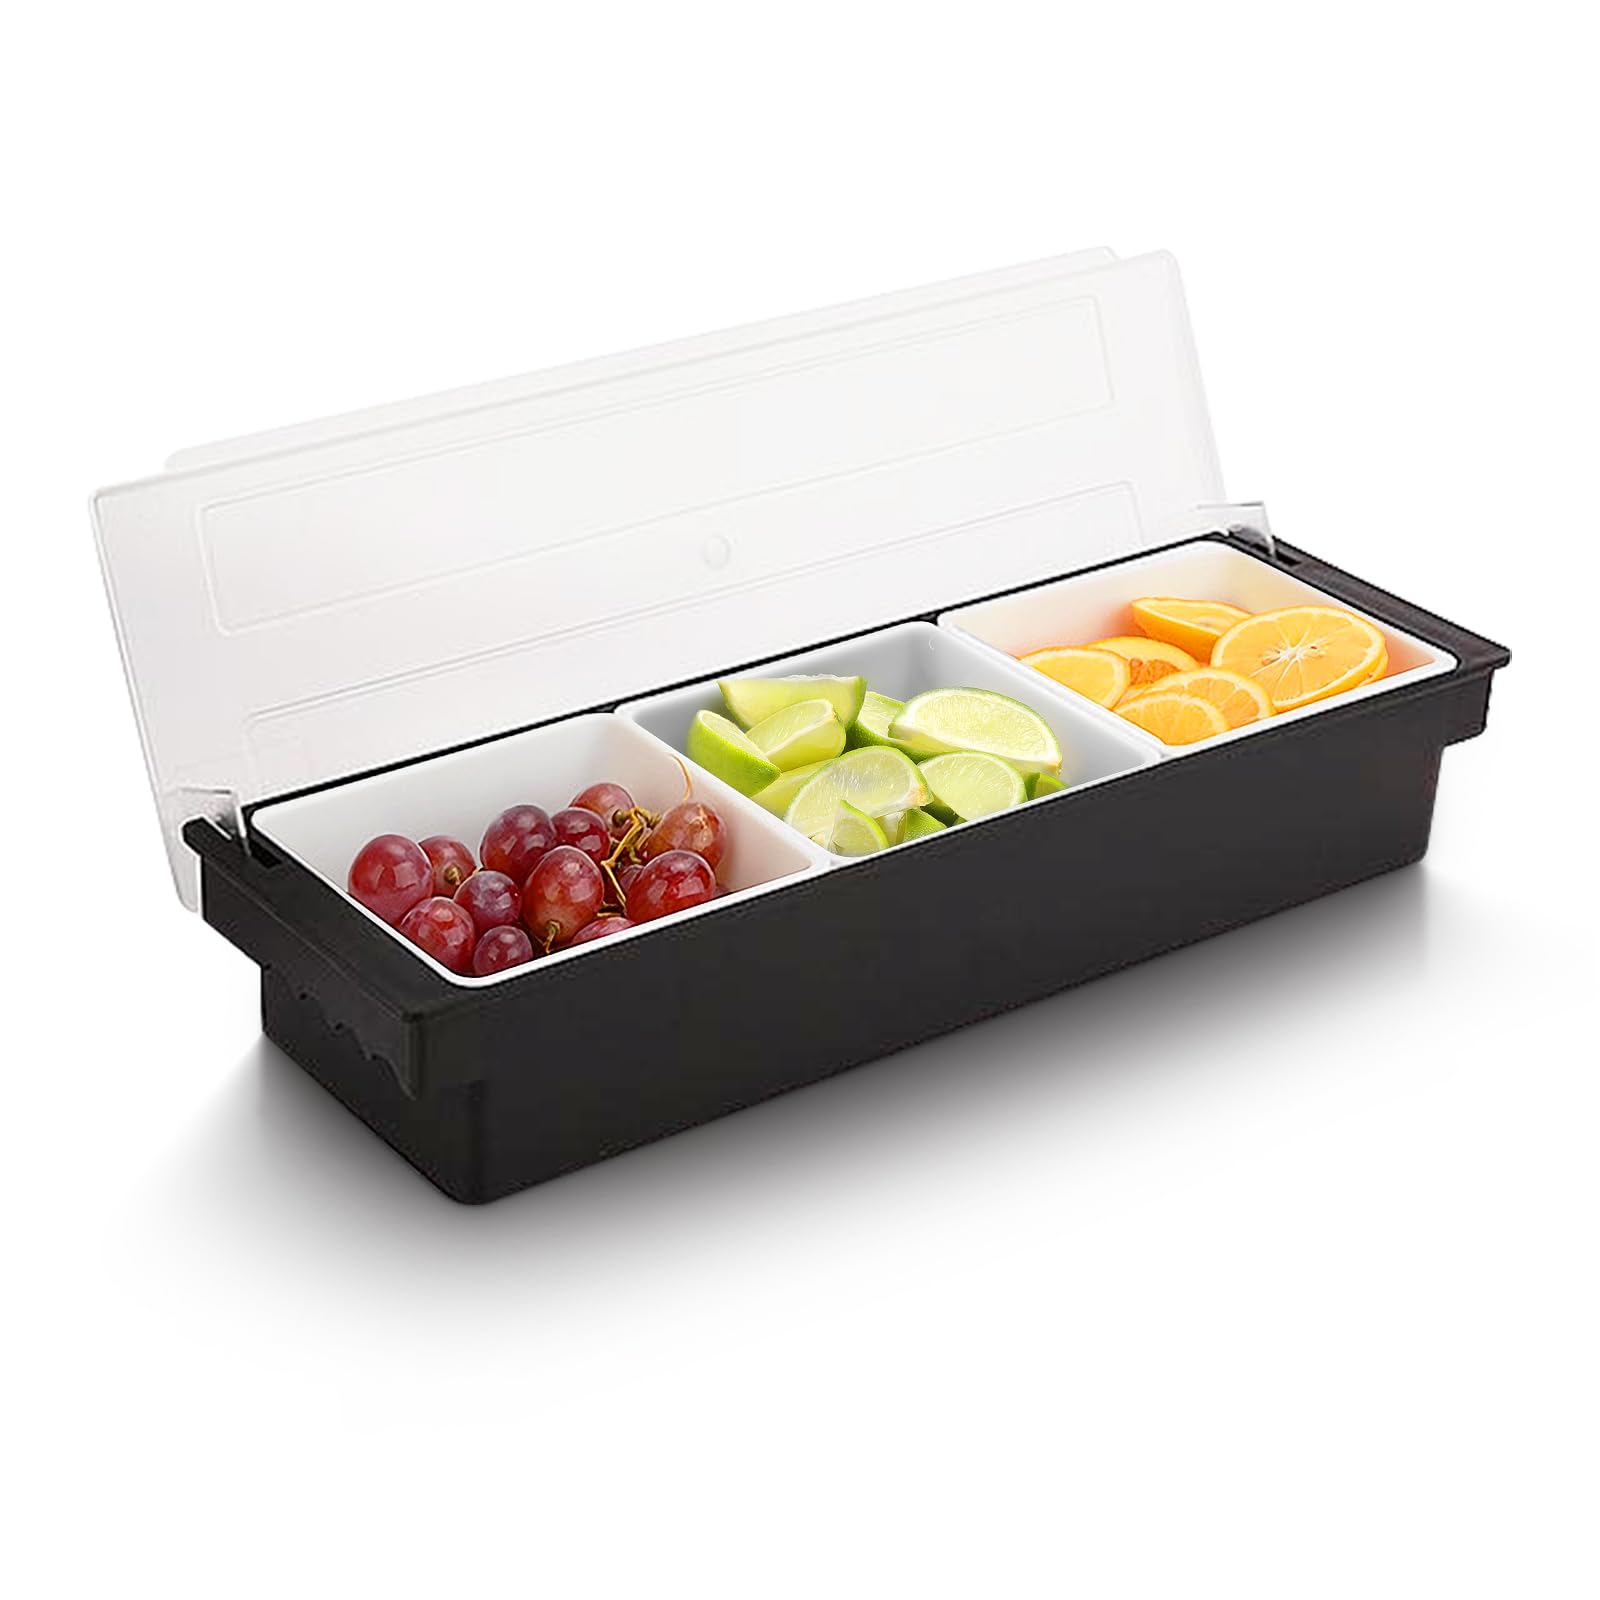 WICHEMI Fruit, Veggie & Condiment Caddy with Lid Dispenser Tray Plastic Garnish Station for Bartending & Serving Taco, Ice Cream, Salad Bar - Topping Organizer for Restaurant Supplies (3 Compartment)